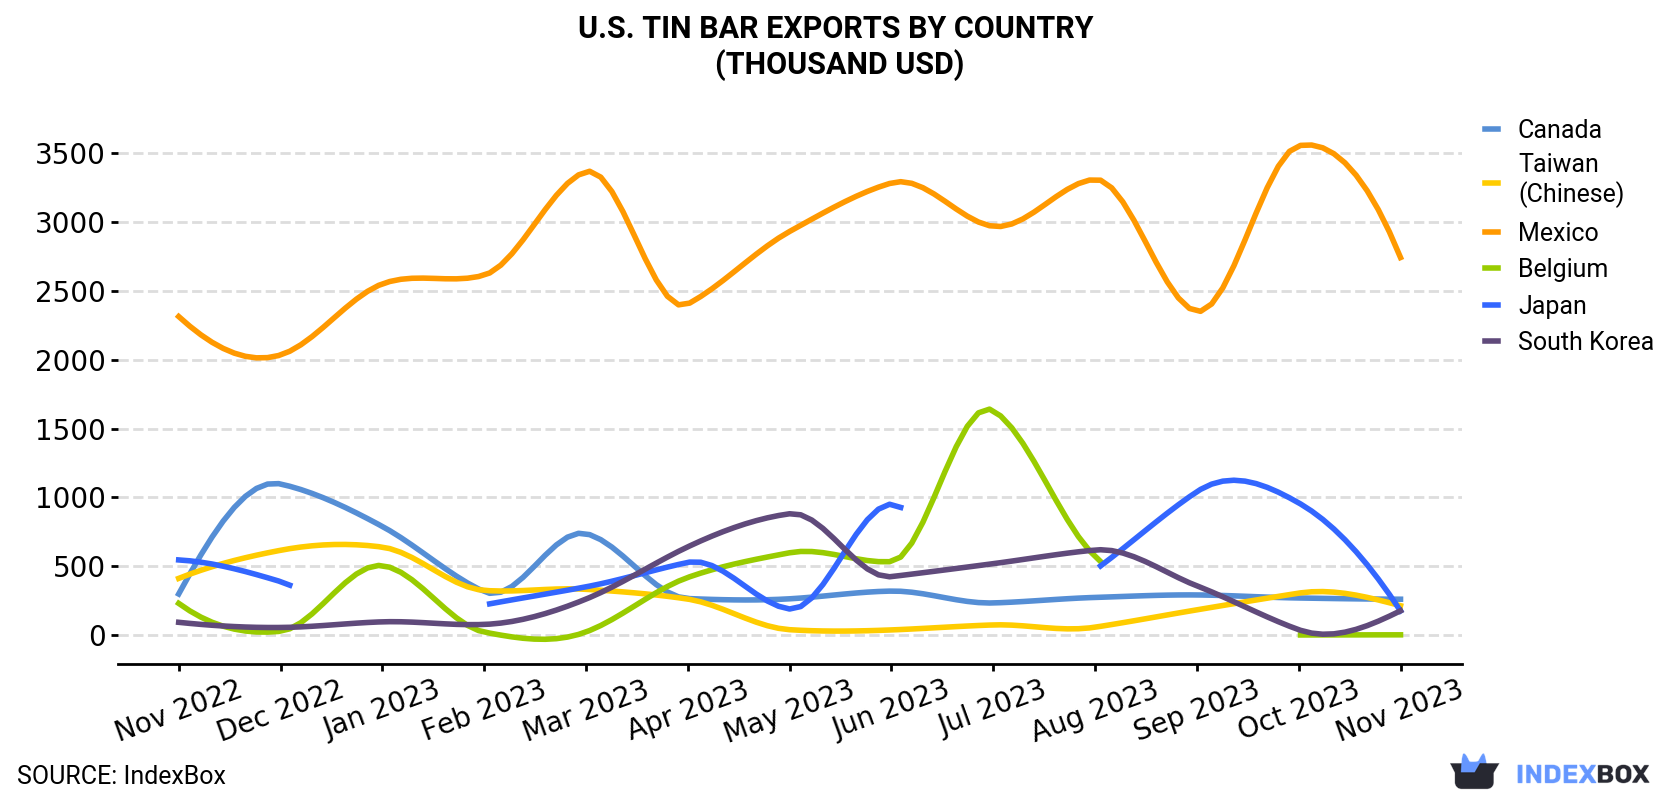 U.S. Tin Bar Exports By Country (Thousand USD)